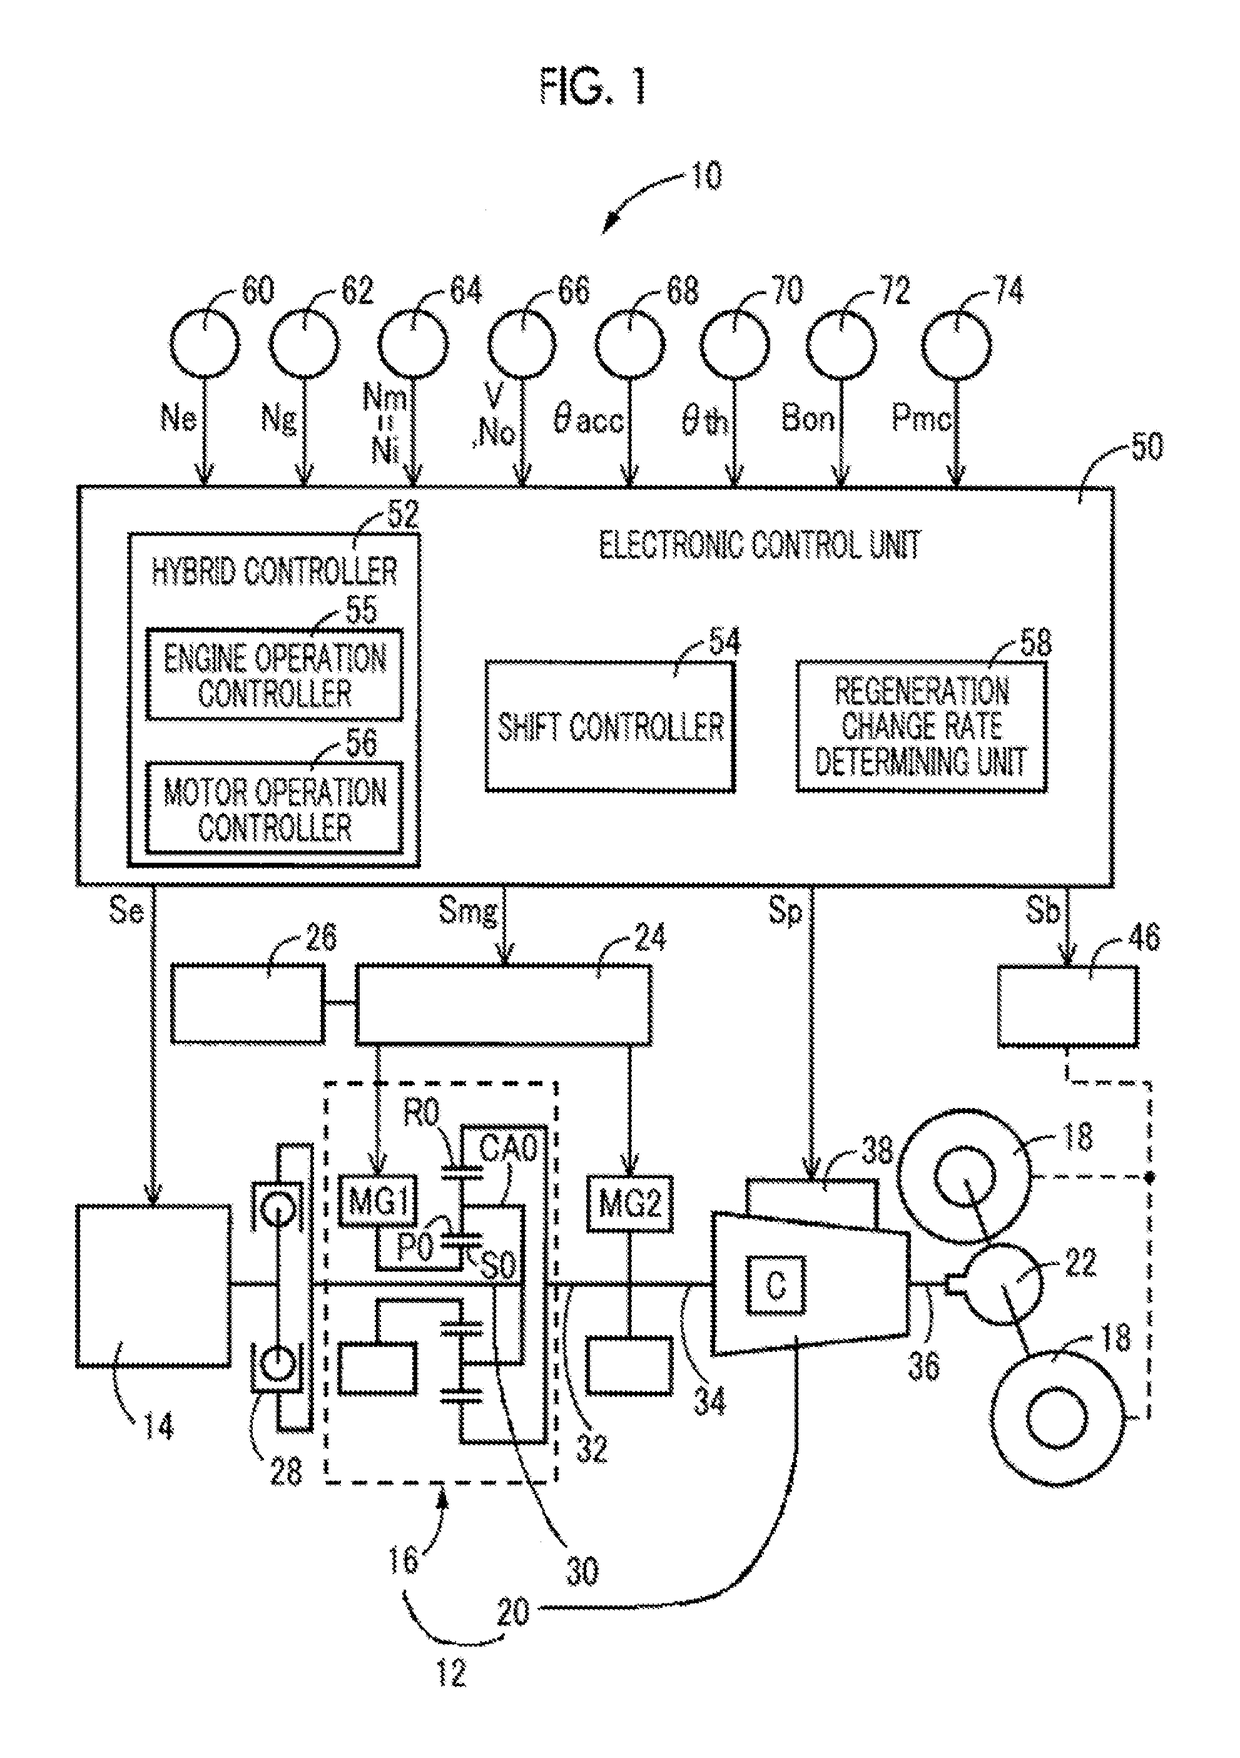 Control system of power transmission system of vehicle